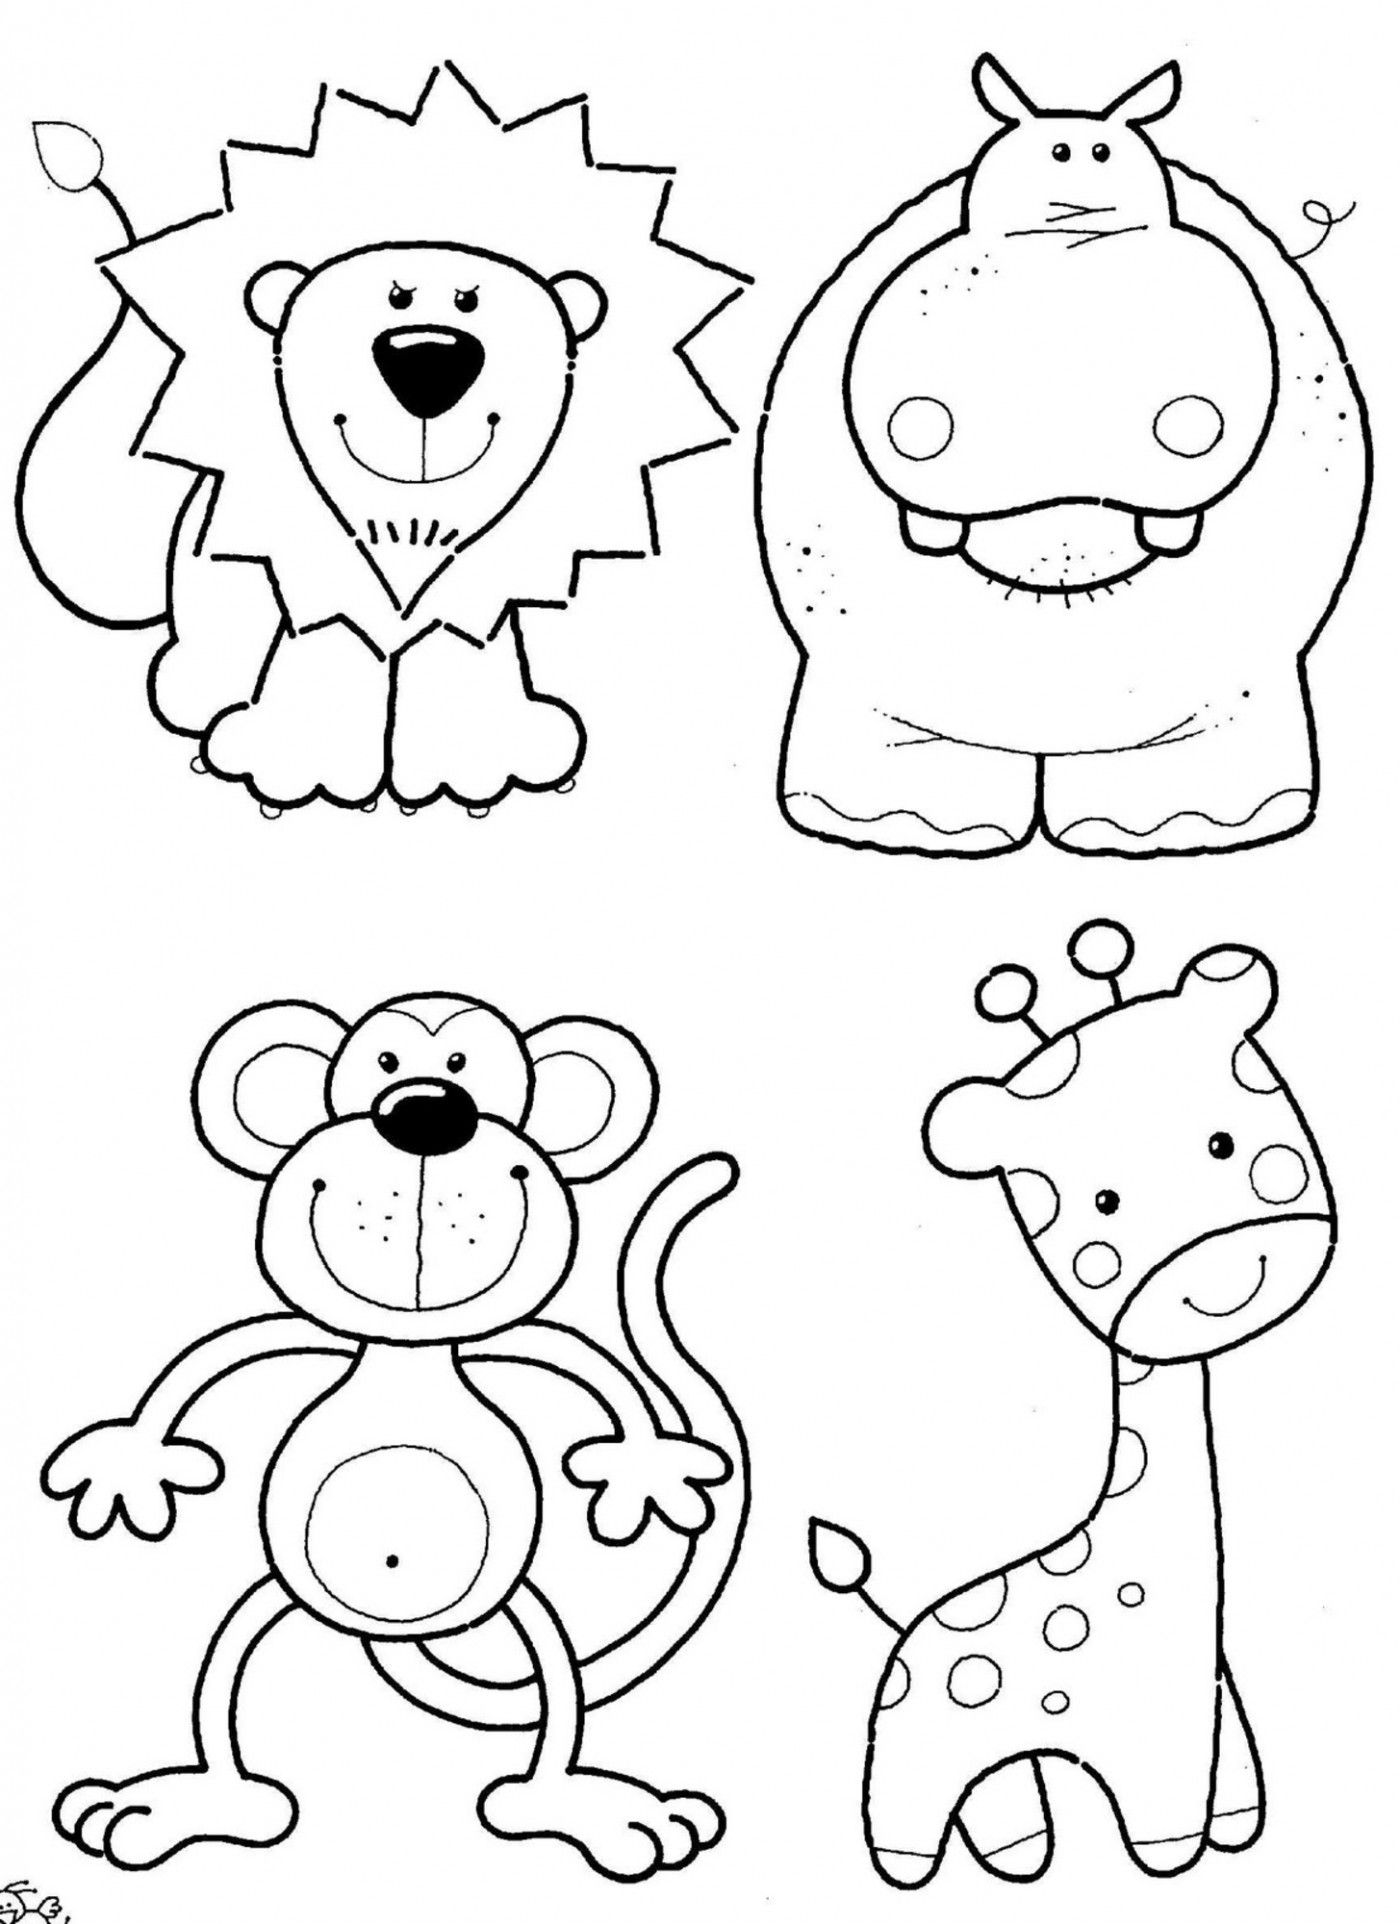 Animal Coloring Pages Toddlers   Coloring Home